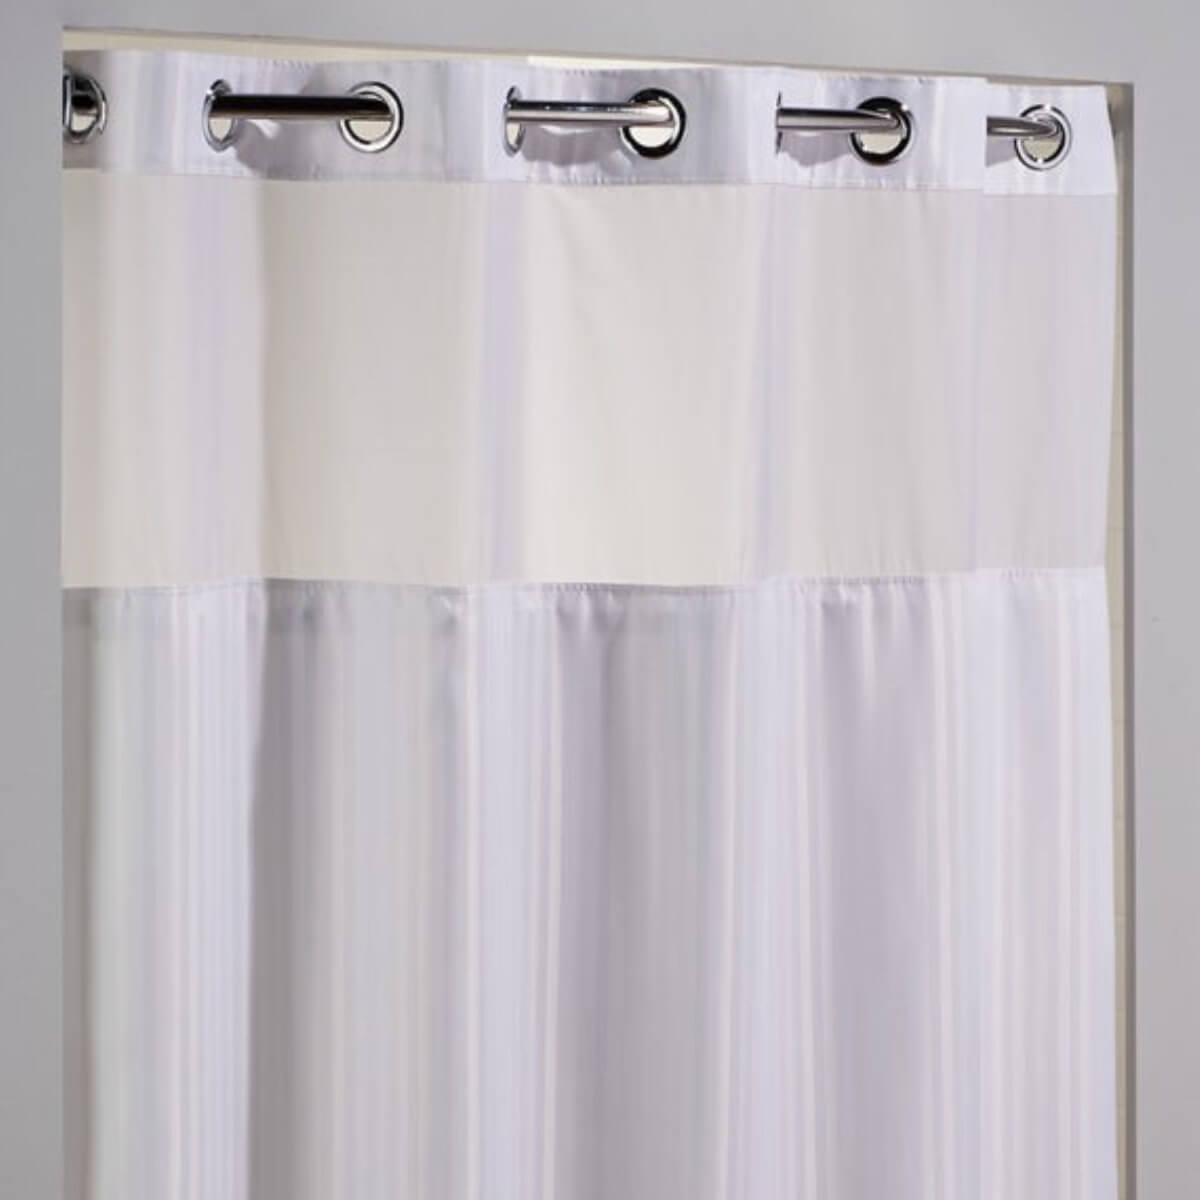 mold resistant shower curtain